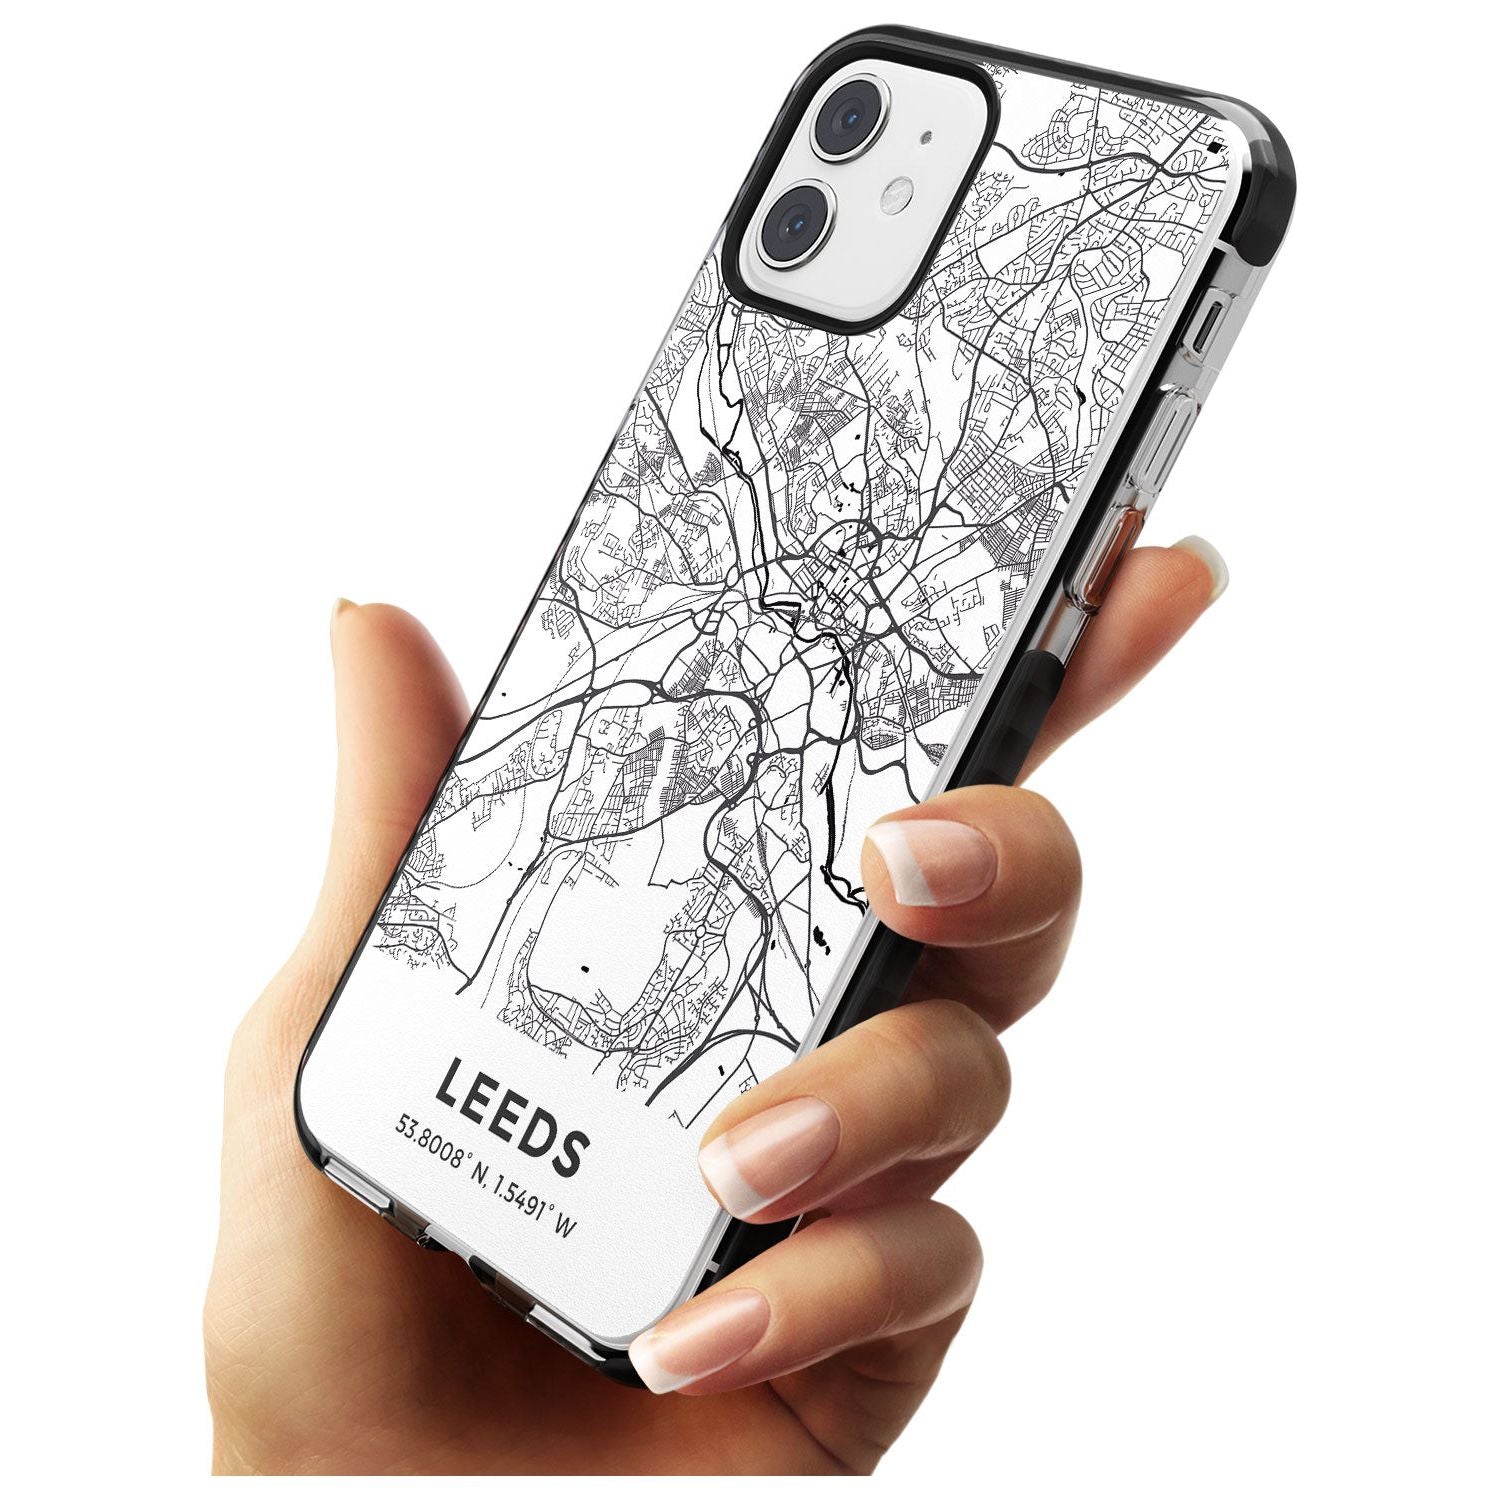 Map of Leeds, England Black Impact Phone Case for iPhone 11